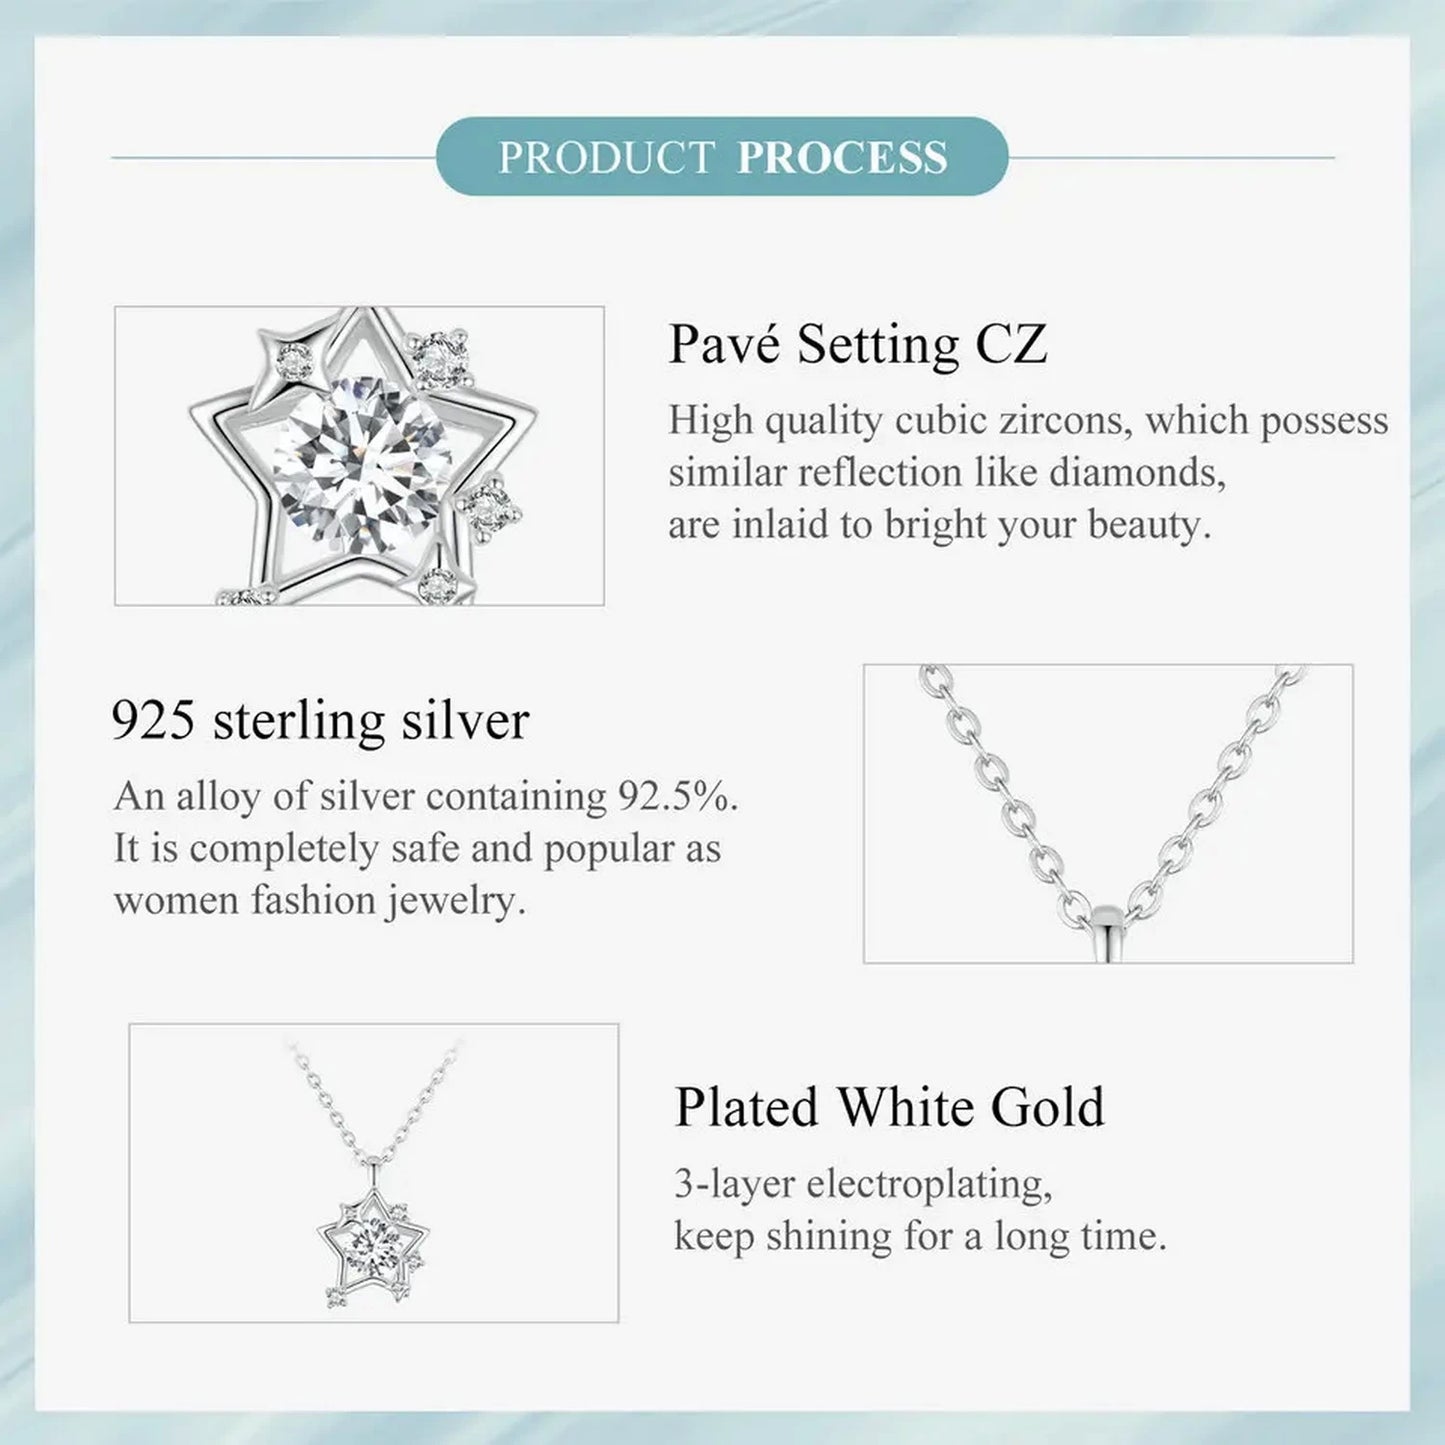 PAHALA 925 Strling Silver Clear CZ Shiny Star With Crystals Pendant Necklace